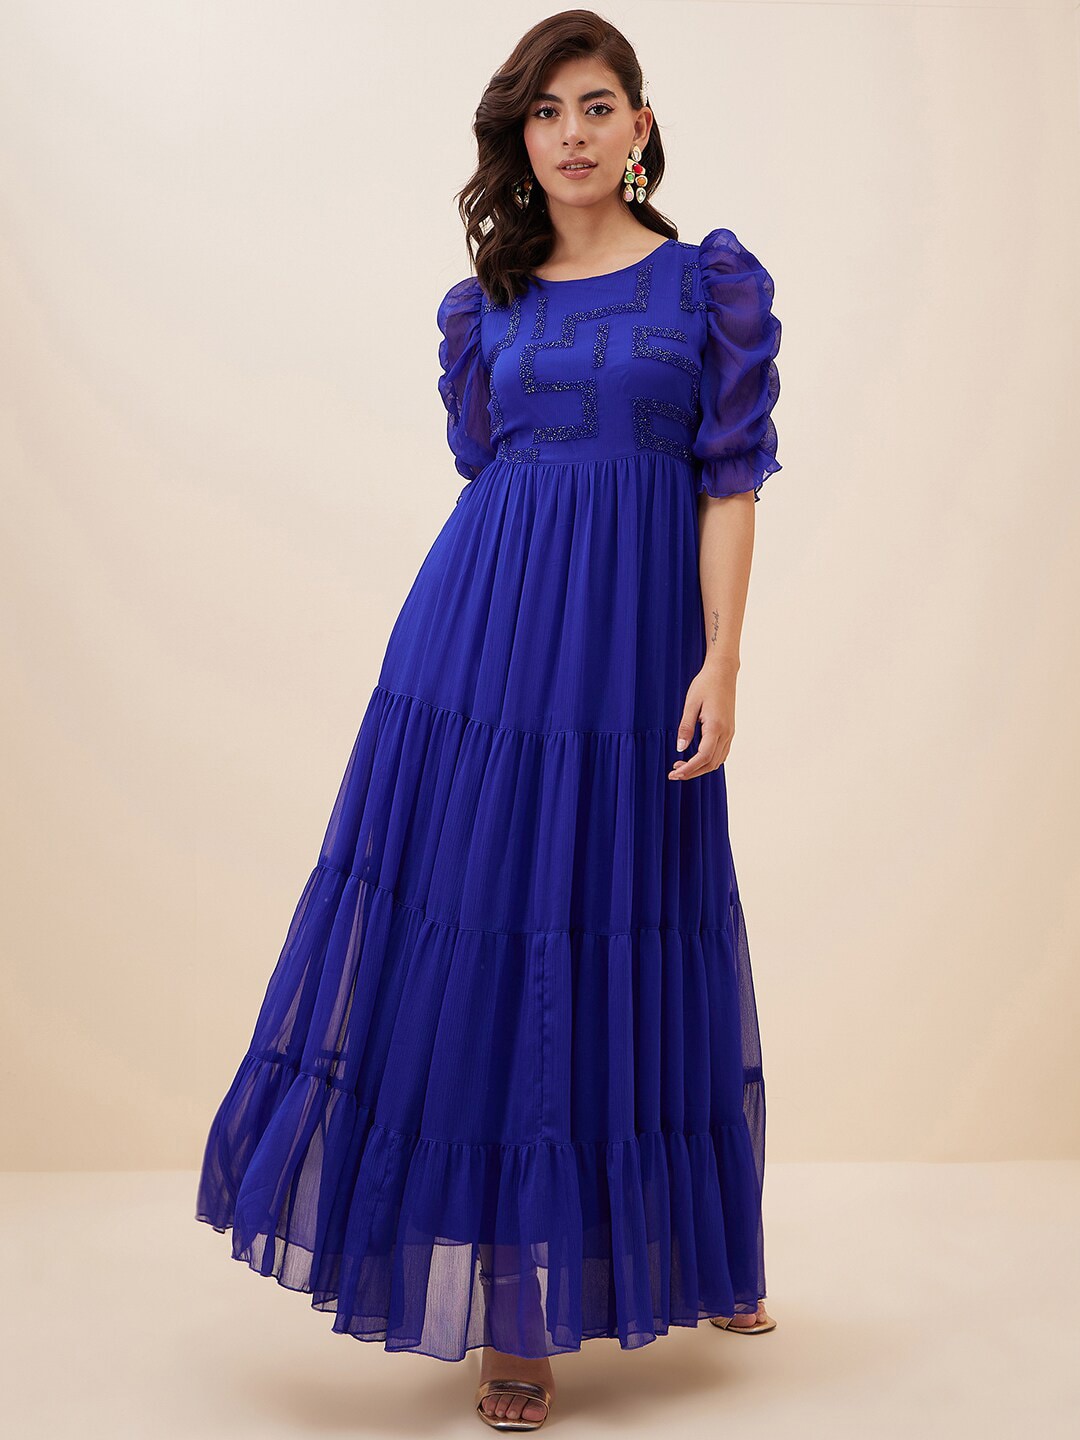 Antheaa Embellished Puff Sleeves Chiffon Fit and Flare Maxi Dress Price in India